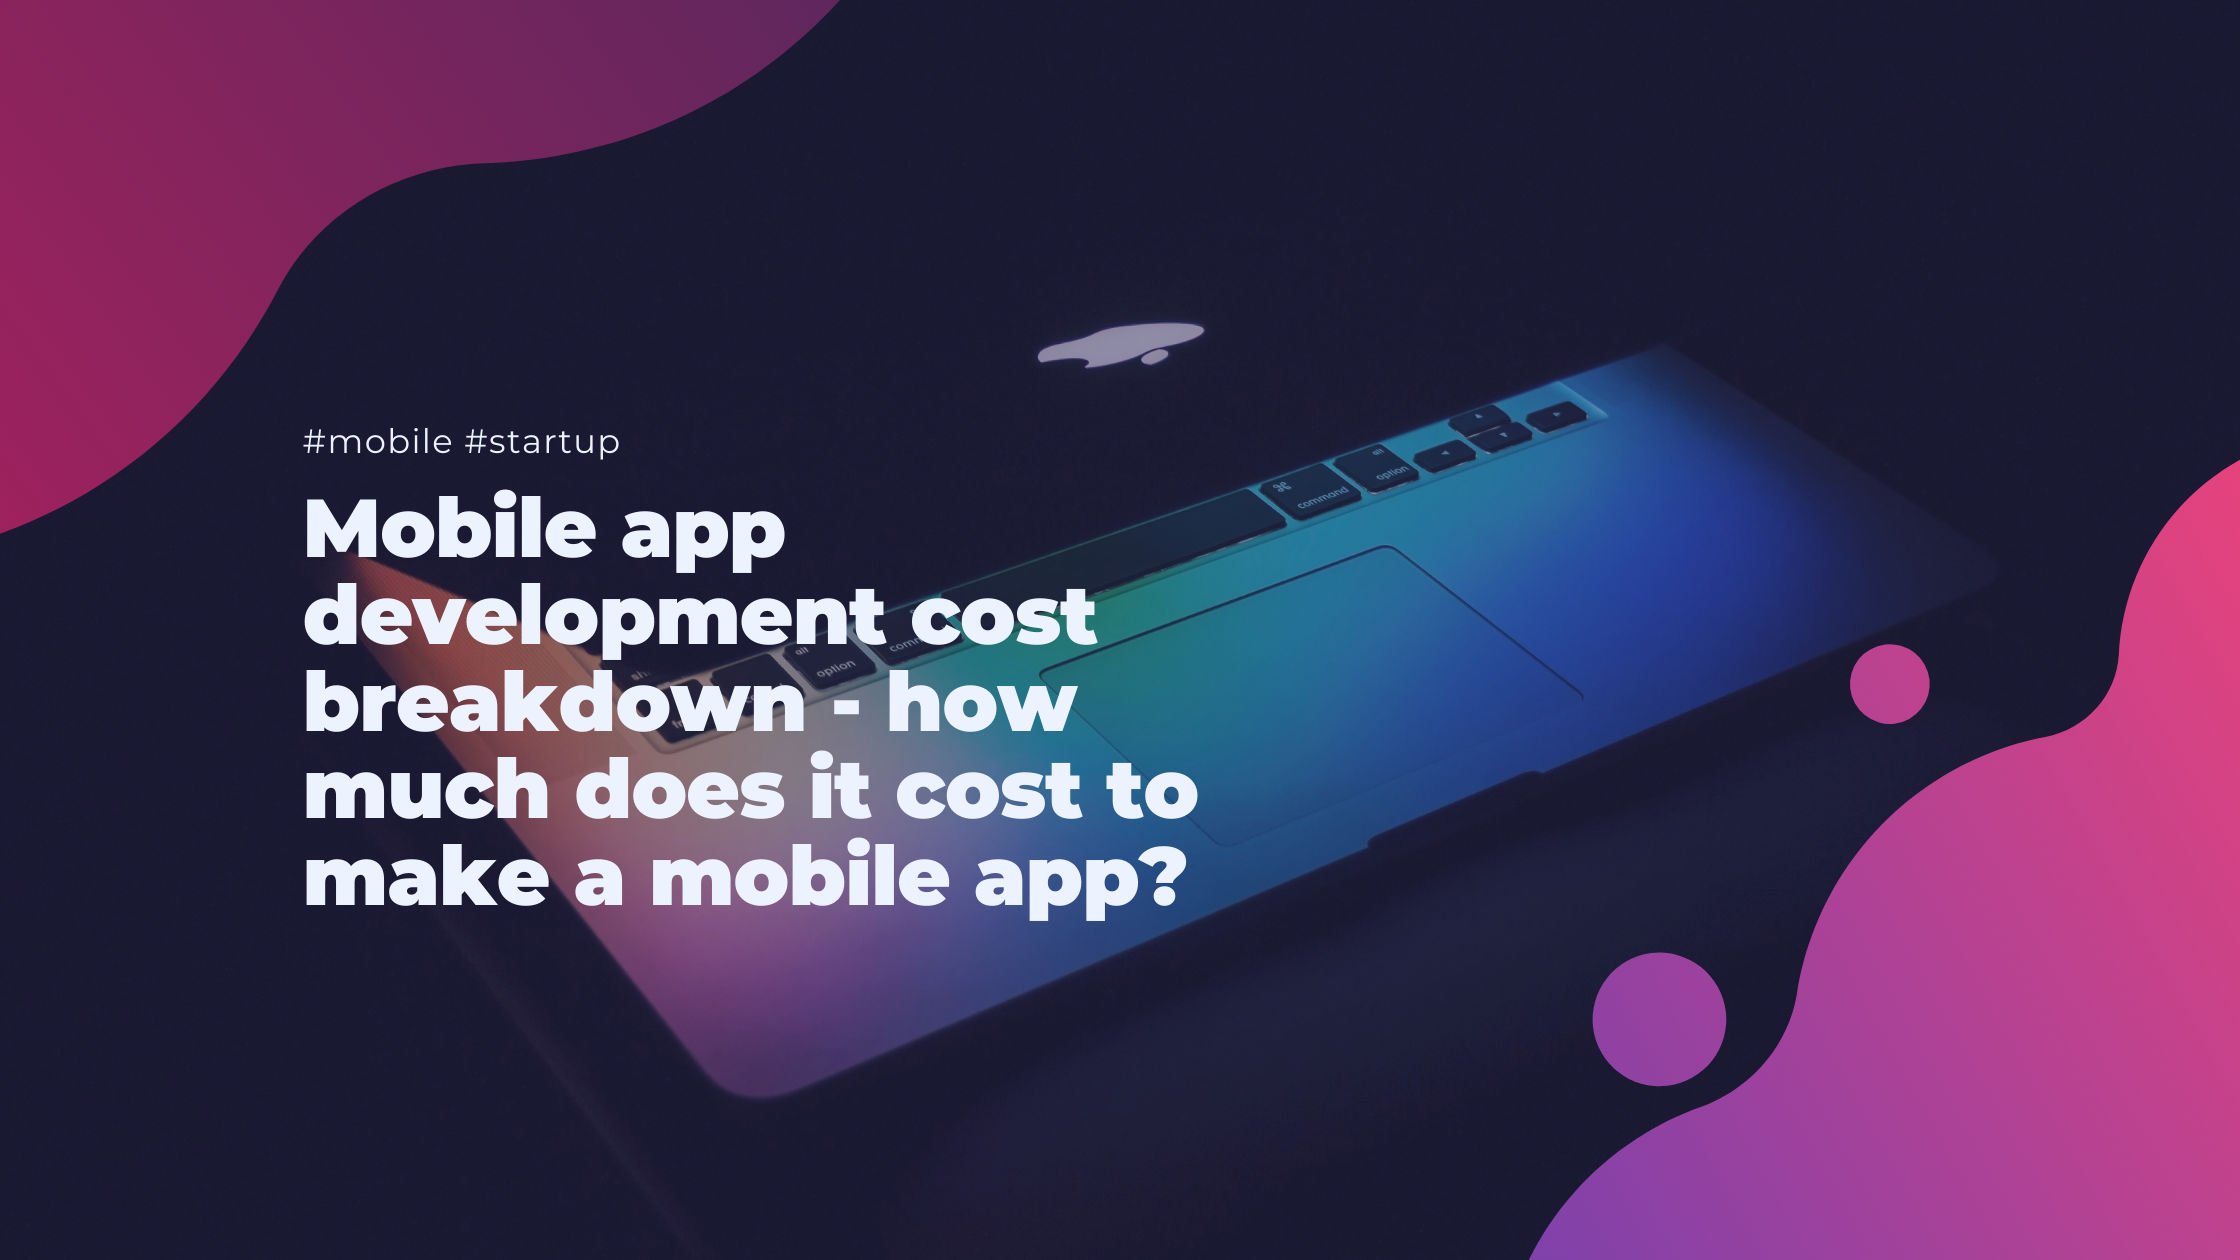 Mobile app development cost breakdown - how much does it cost to make a mobile app?